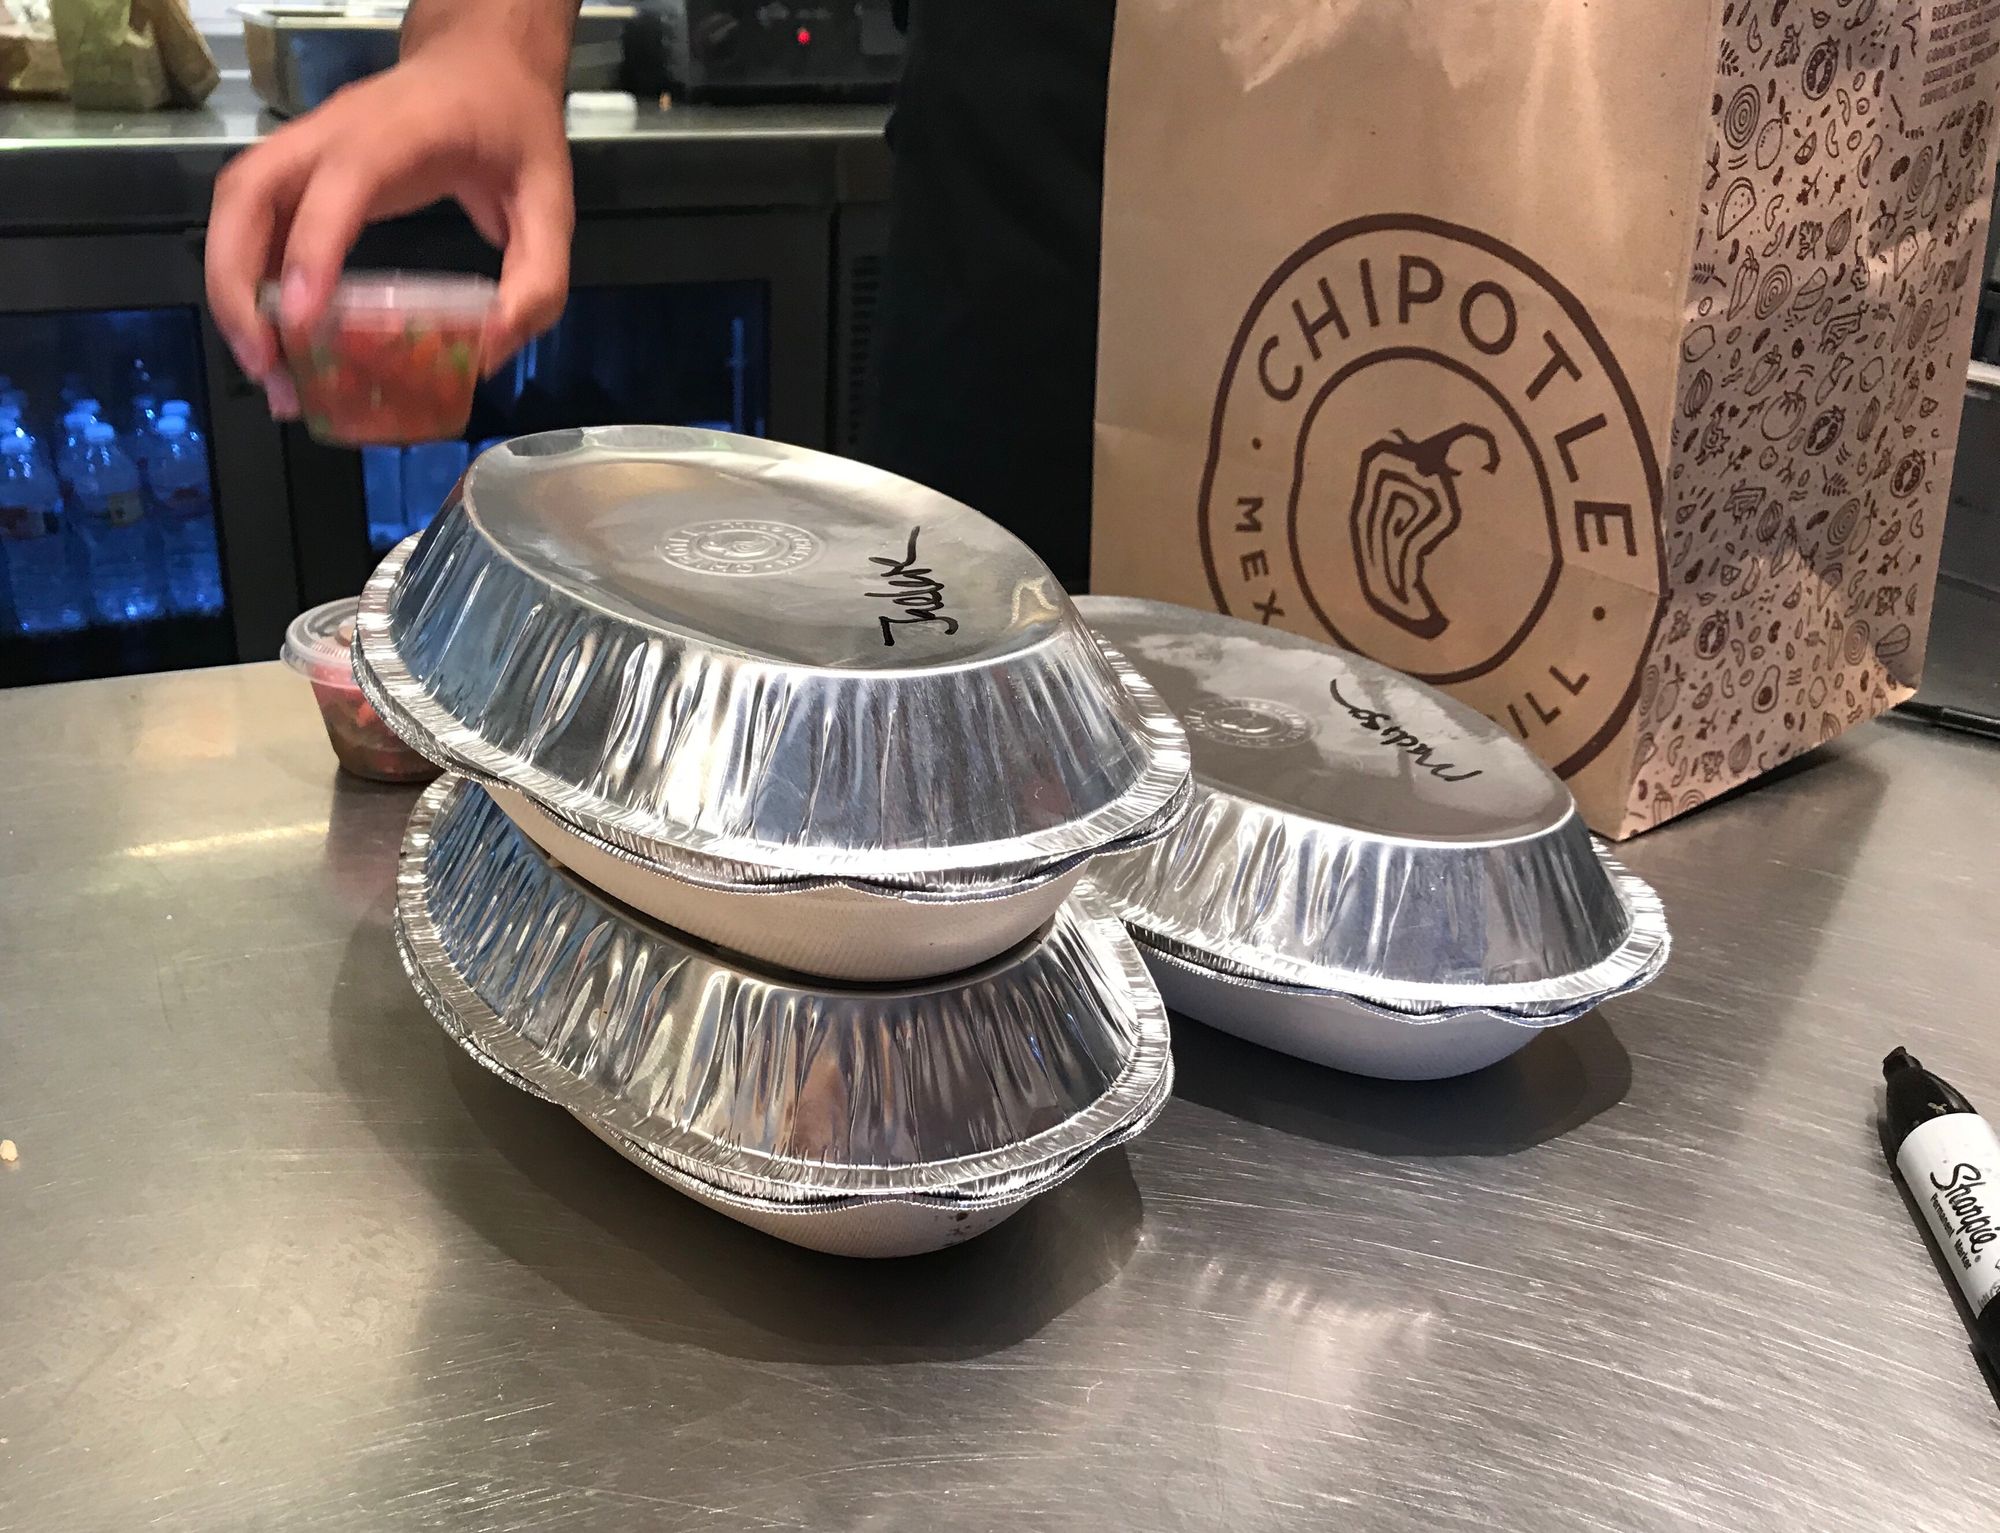 🌮Chipotle's Delivery Fees Settlement Deadline!